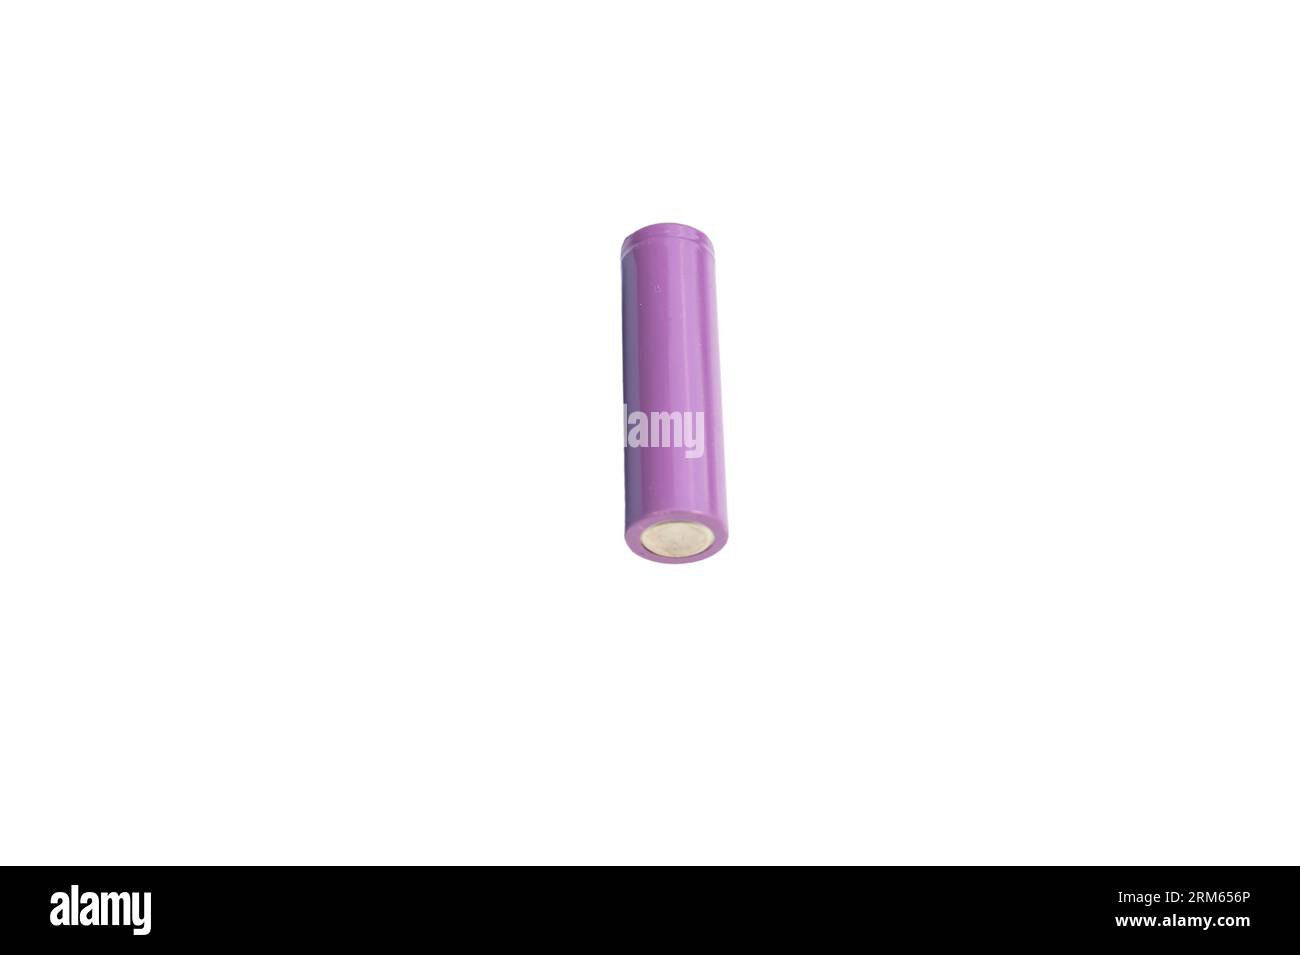 Purple cylindrical li-ion rechargeable battery cell for electrical devices on white background Stock Photo